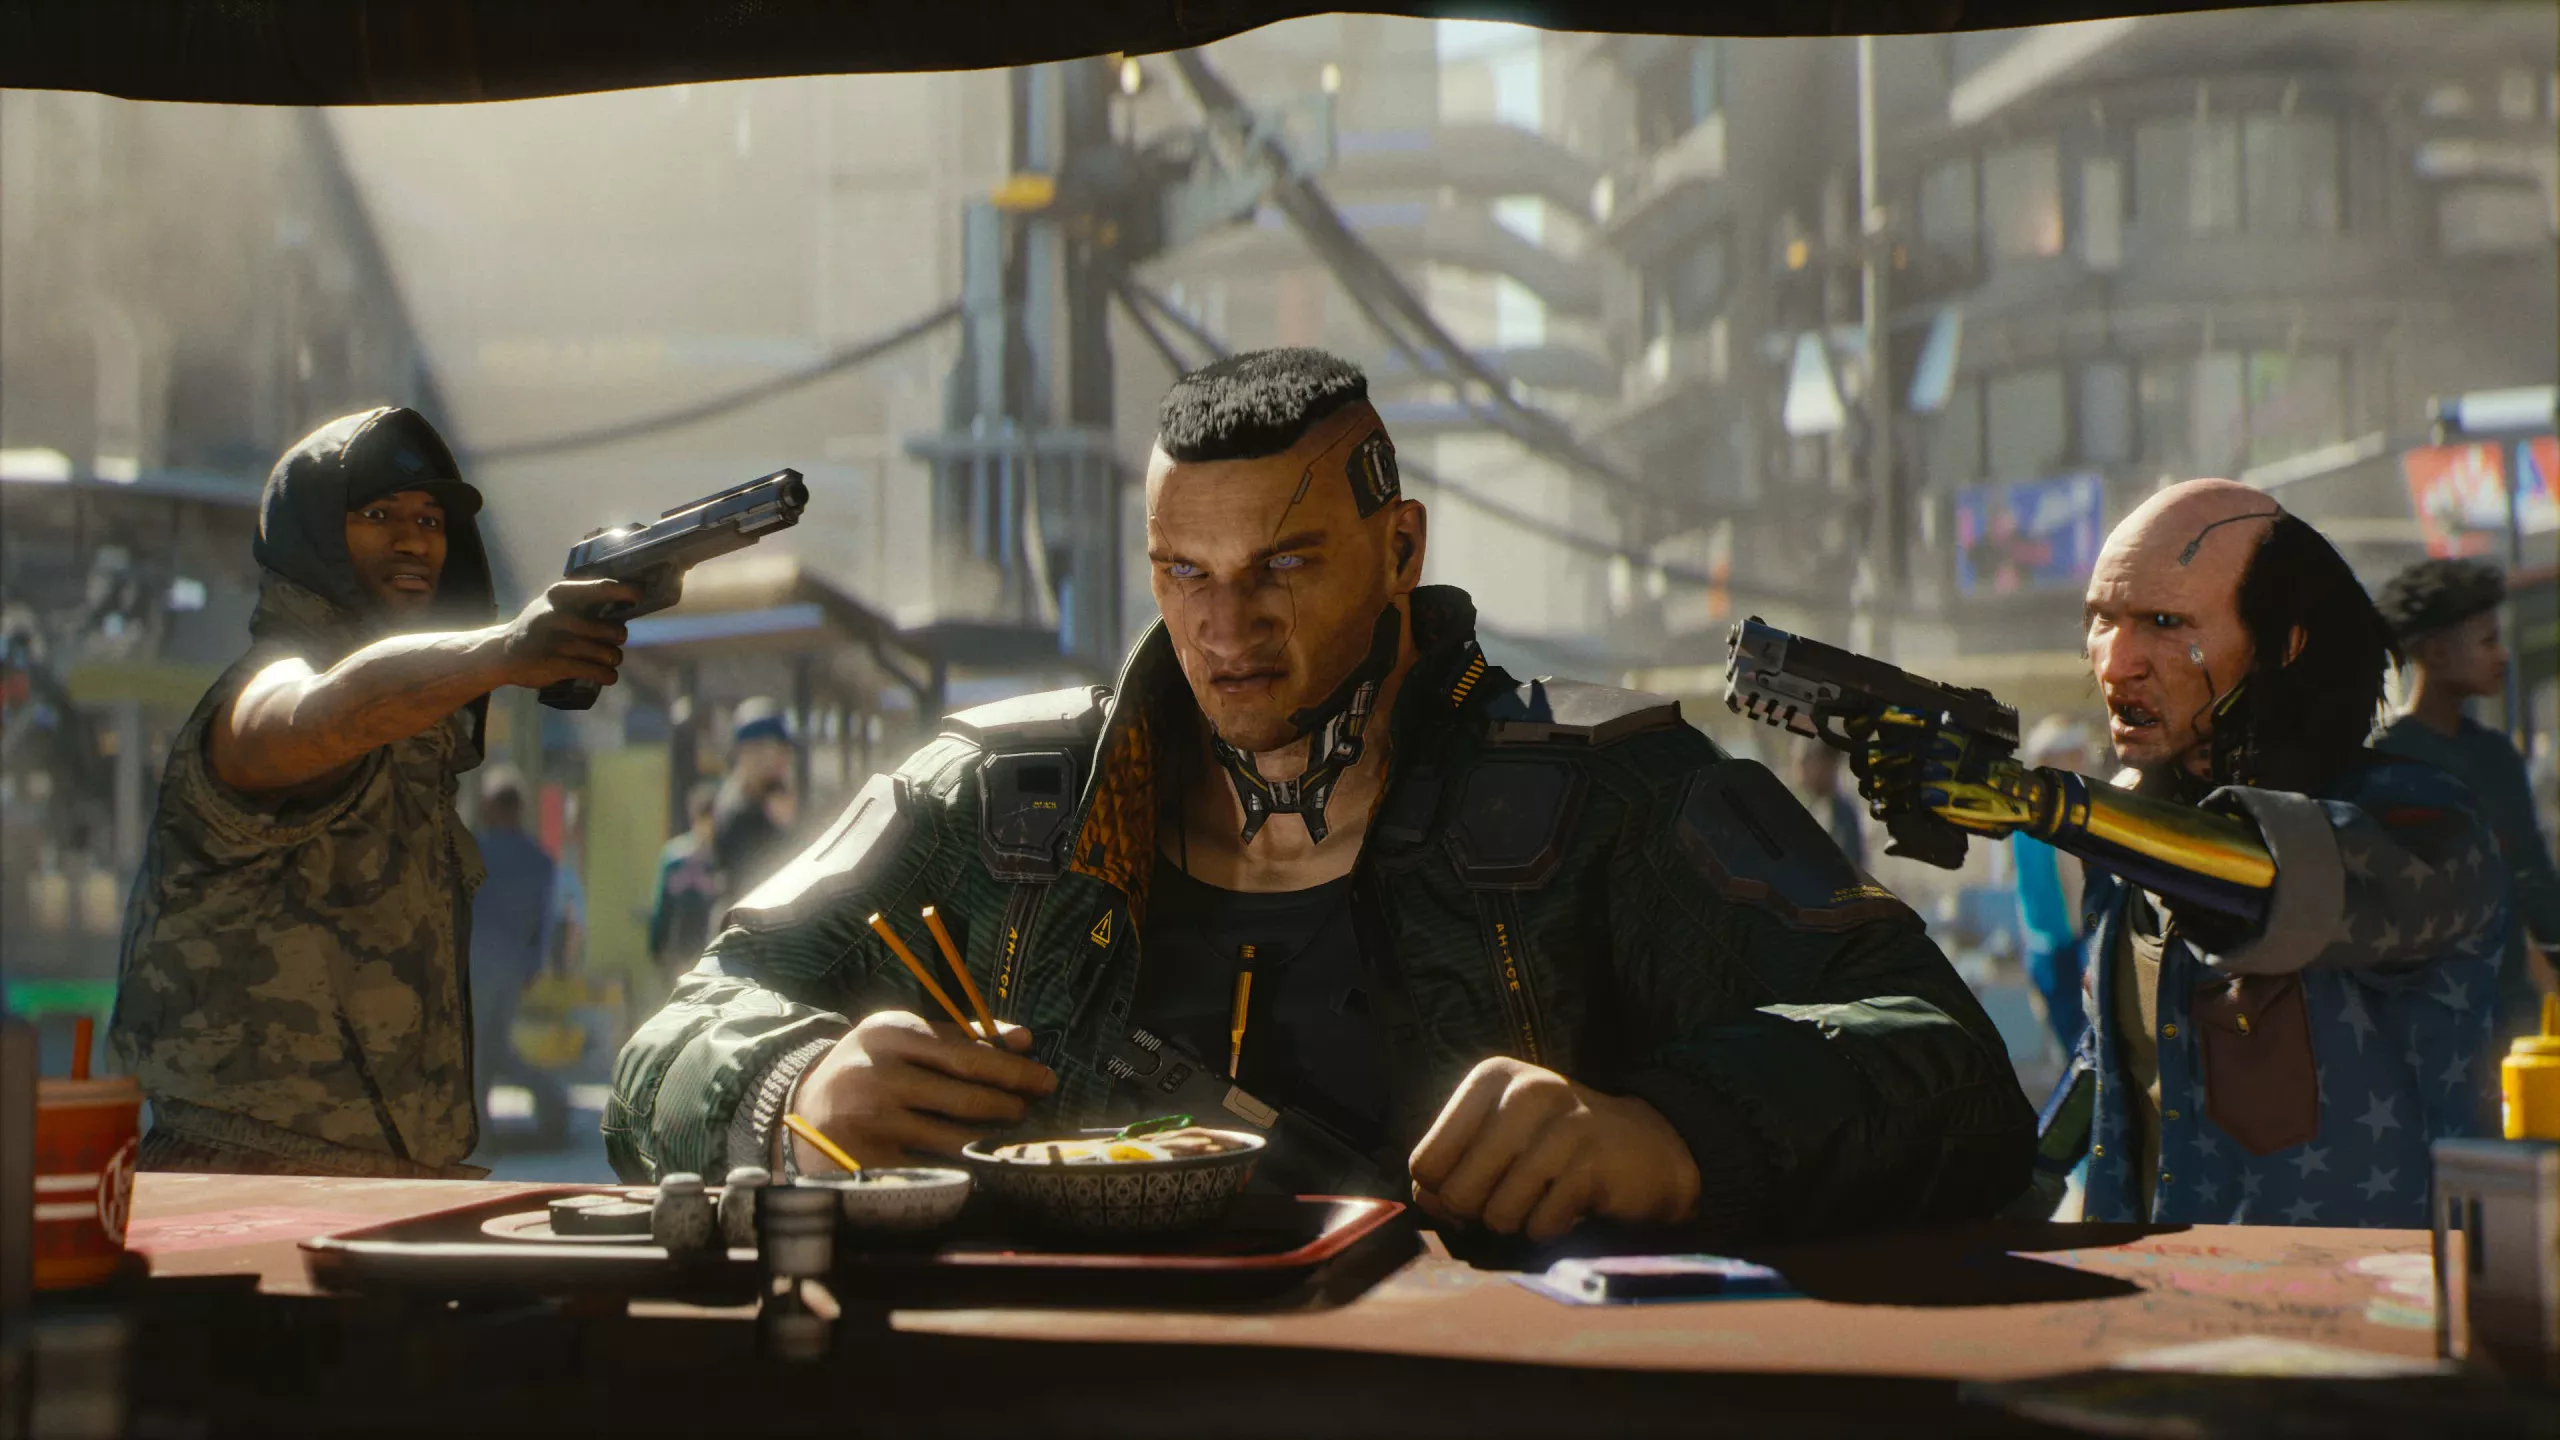 Cyberpunk 2077 update entirely bricks the game for PS4 disc users